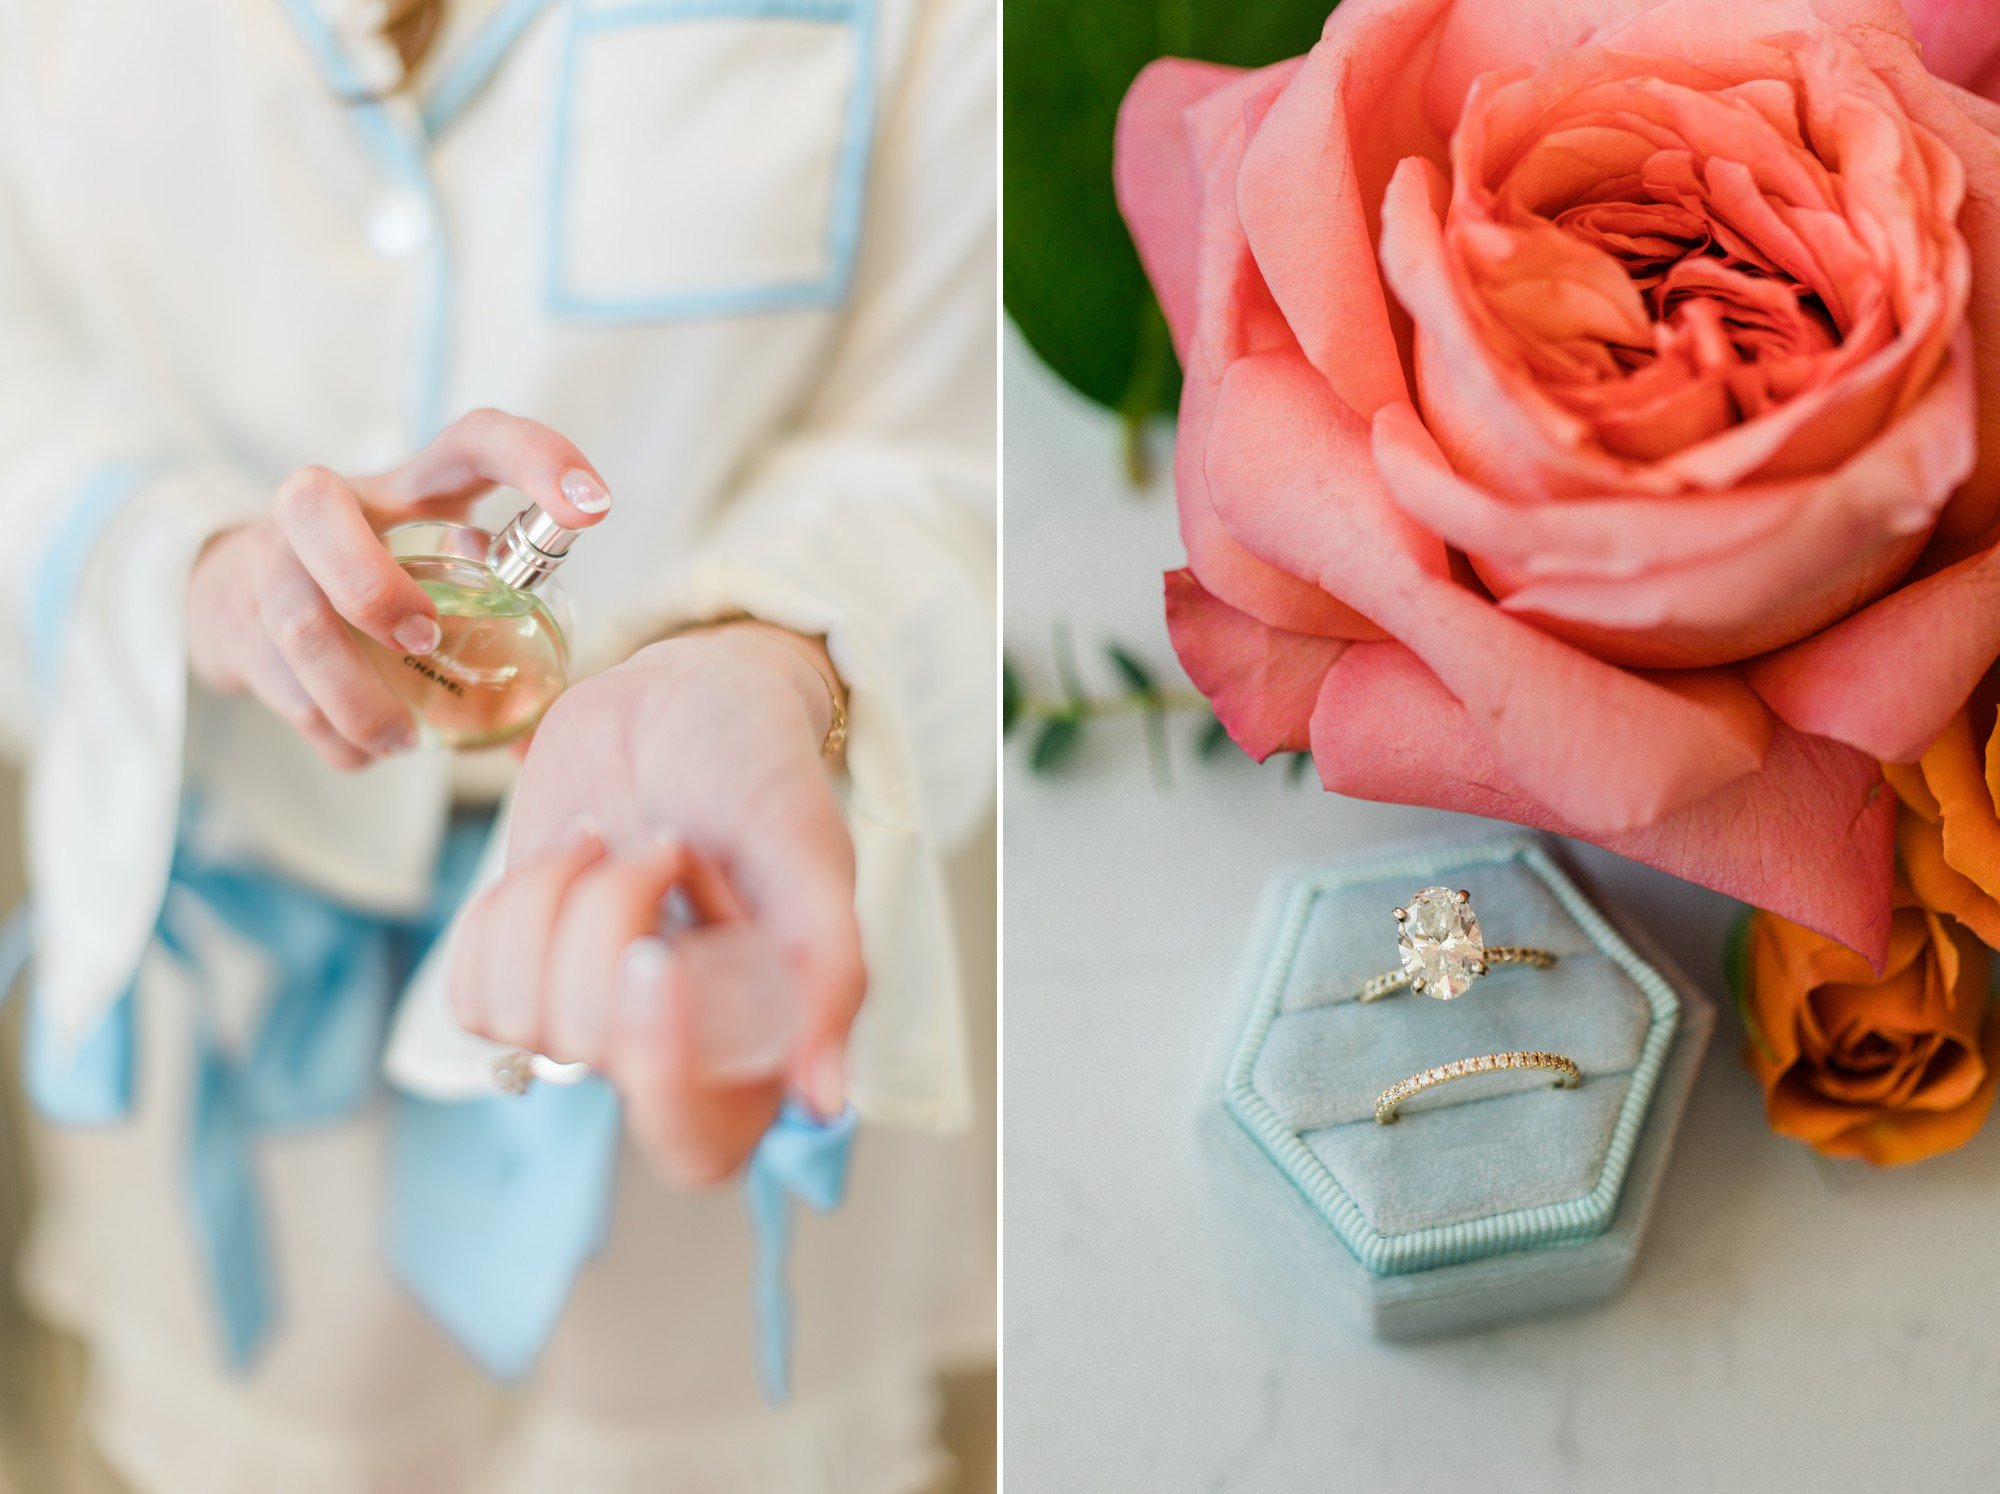 blue ring box with solitarie engagement ring